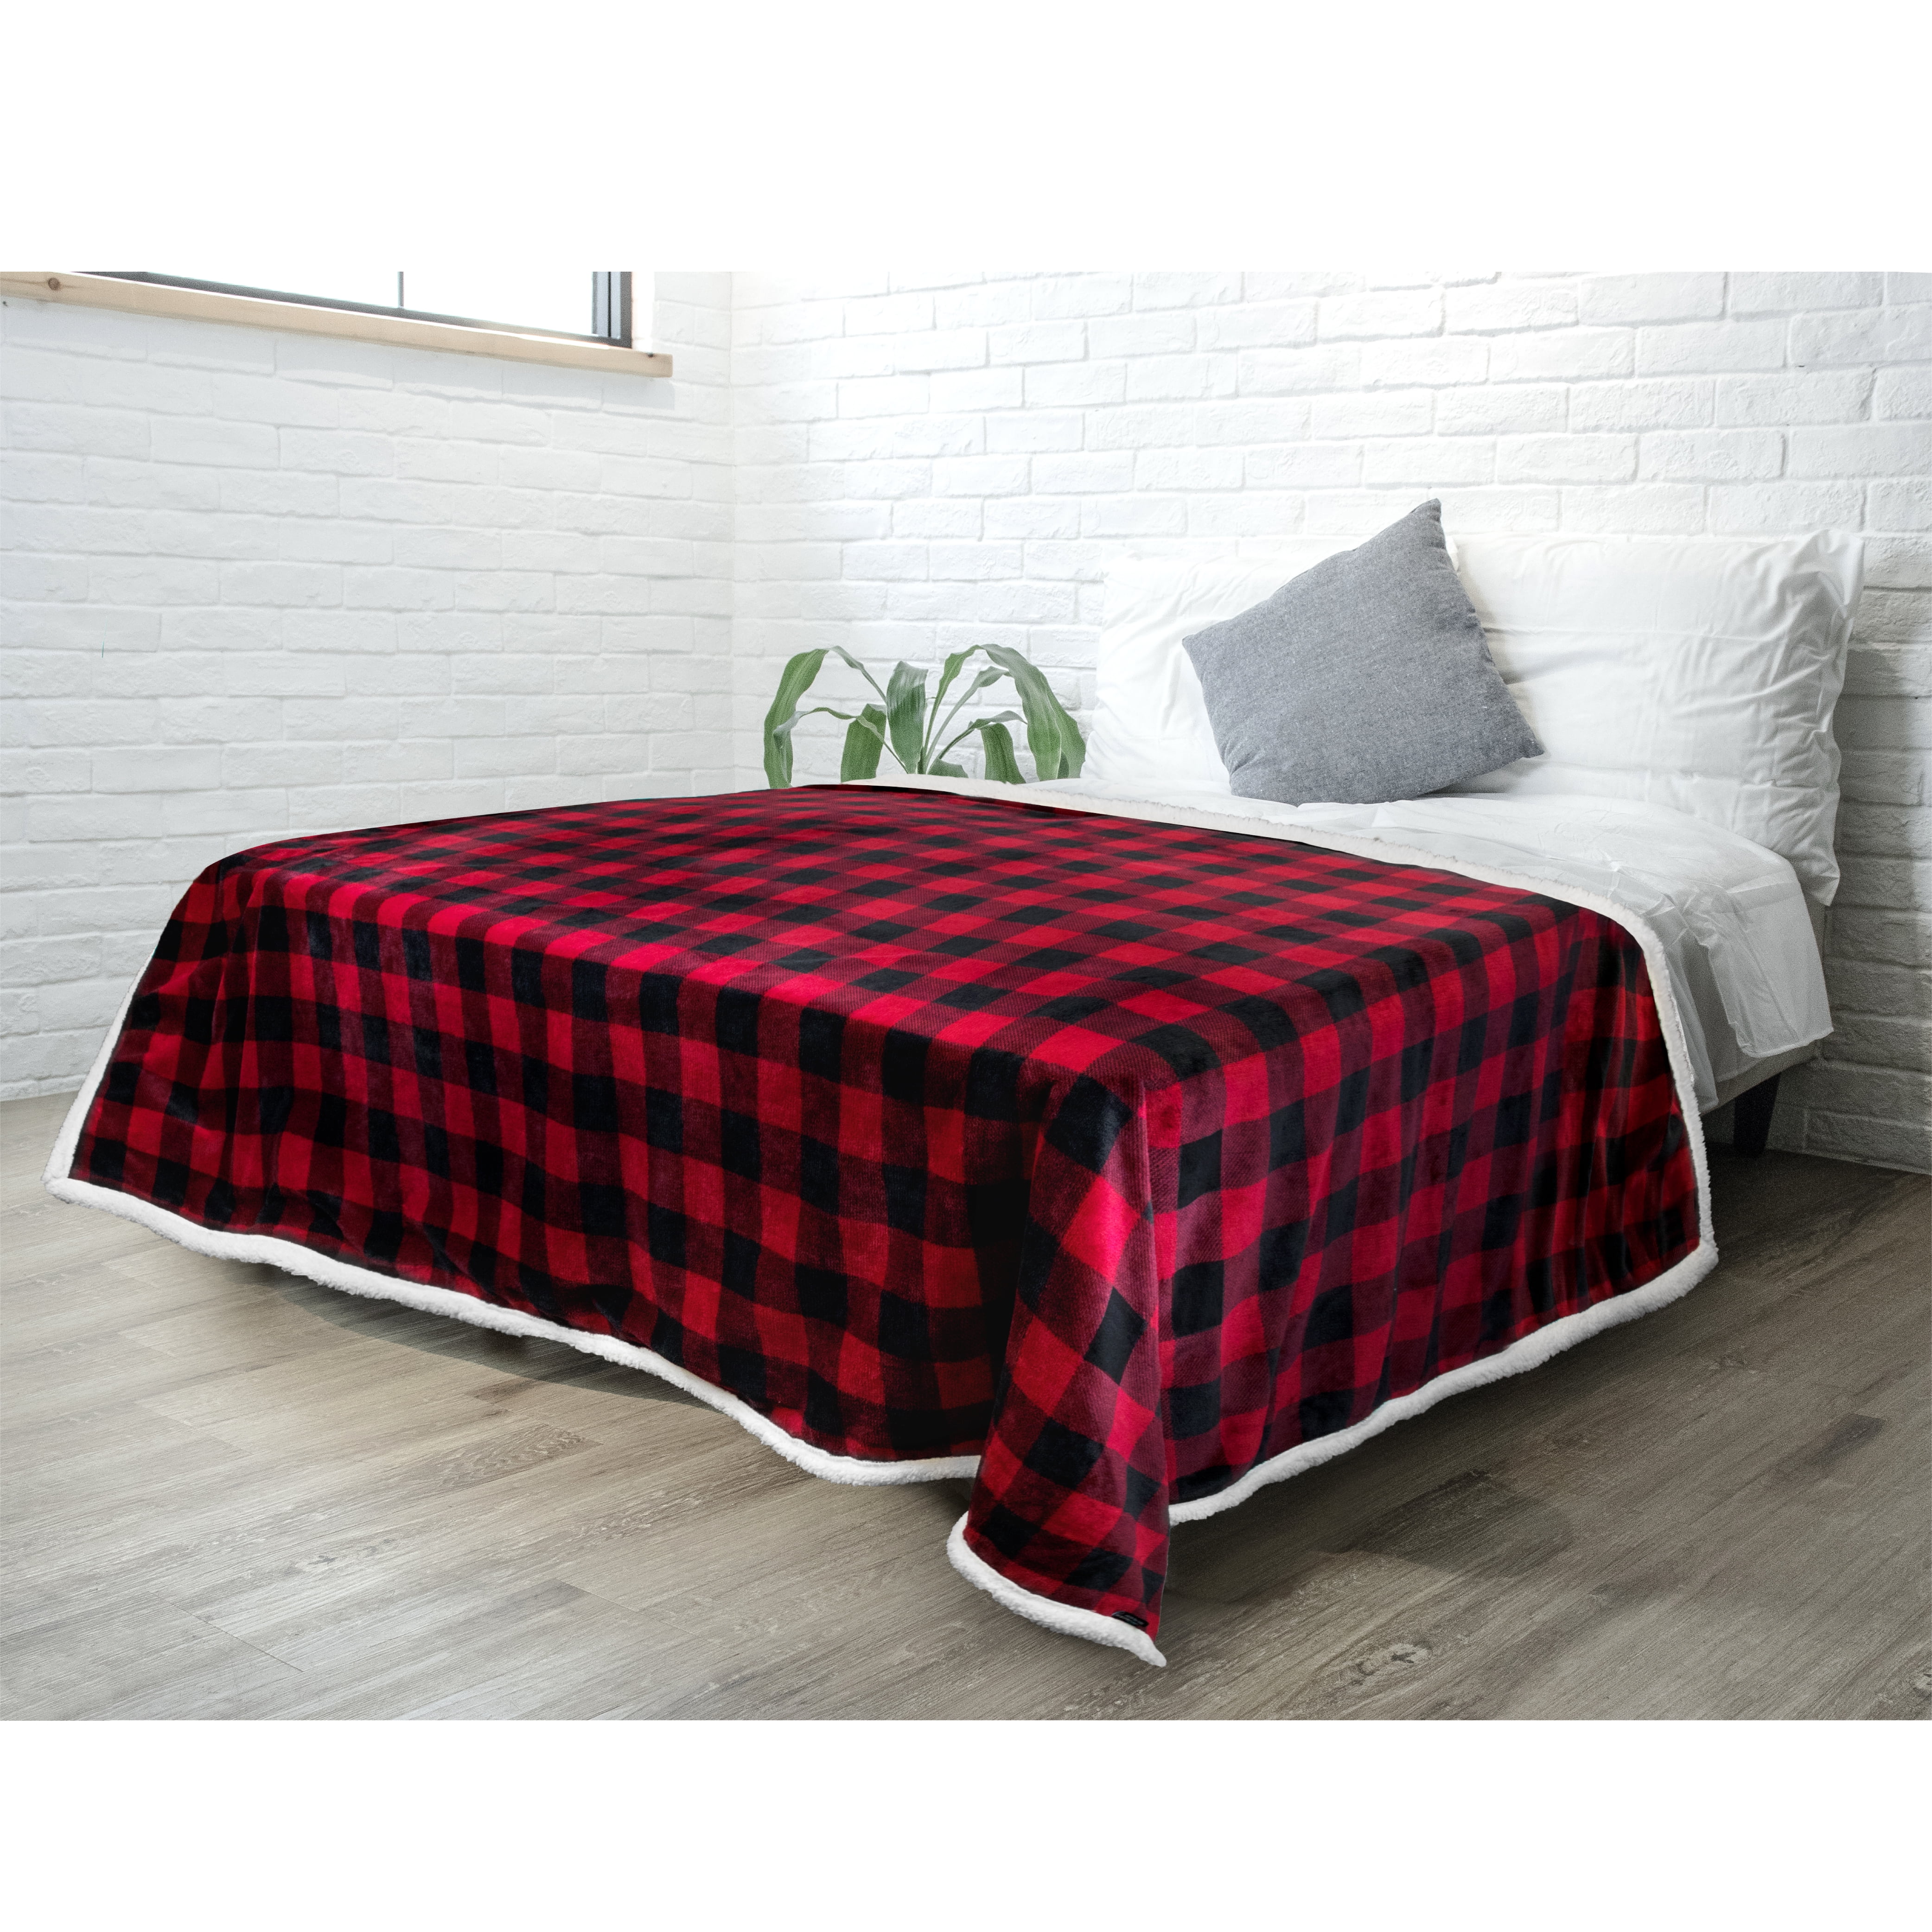 Ukeler Buffalo Check/Plaid Throw Blanket 50×60 for Couch Ultra Soft Plush Flannel Fleece Sherpa Throw Bed Throws for Kids and Adult 